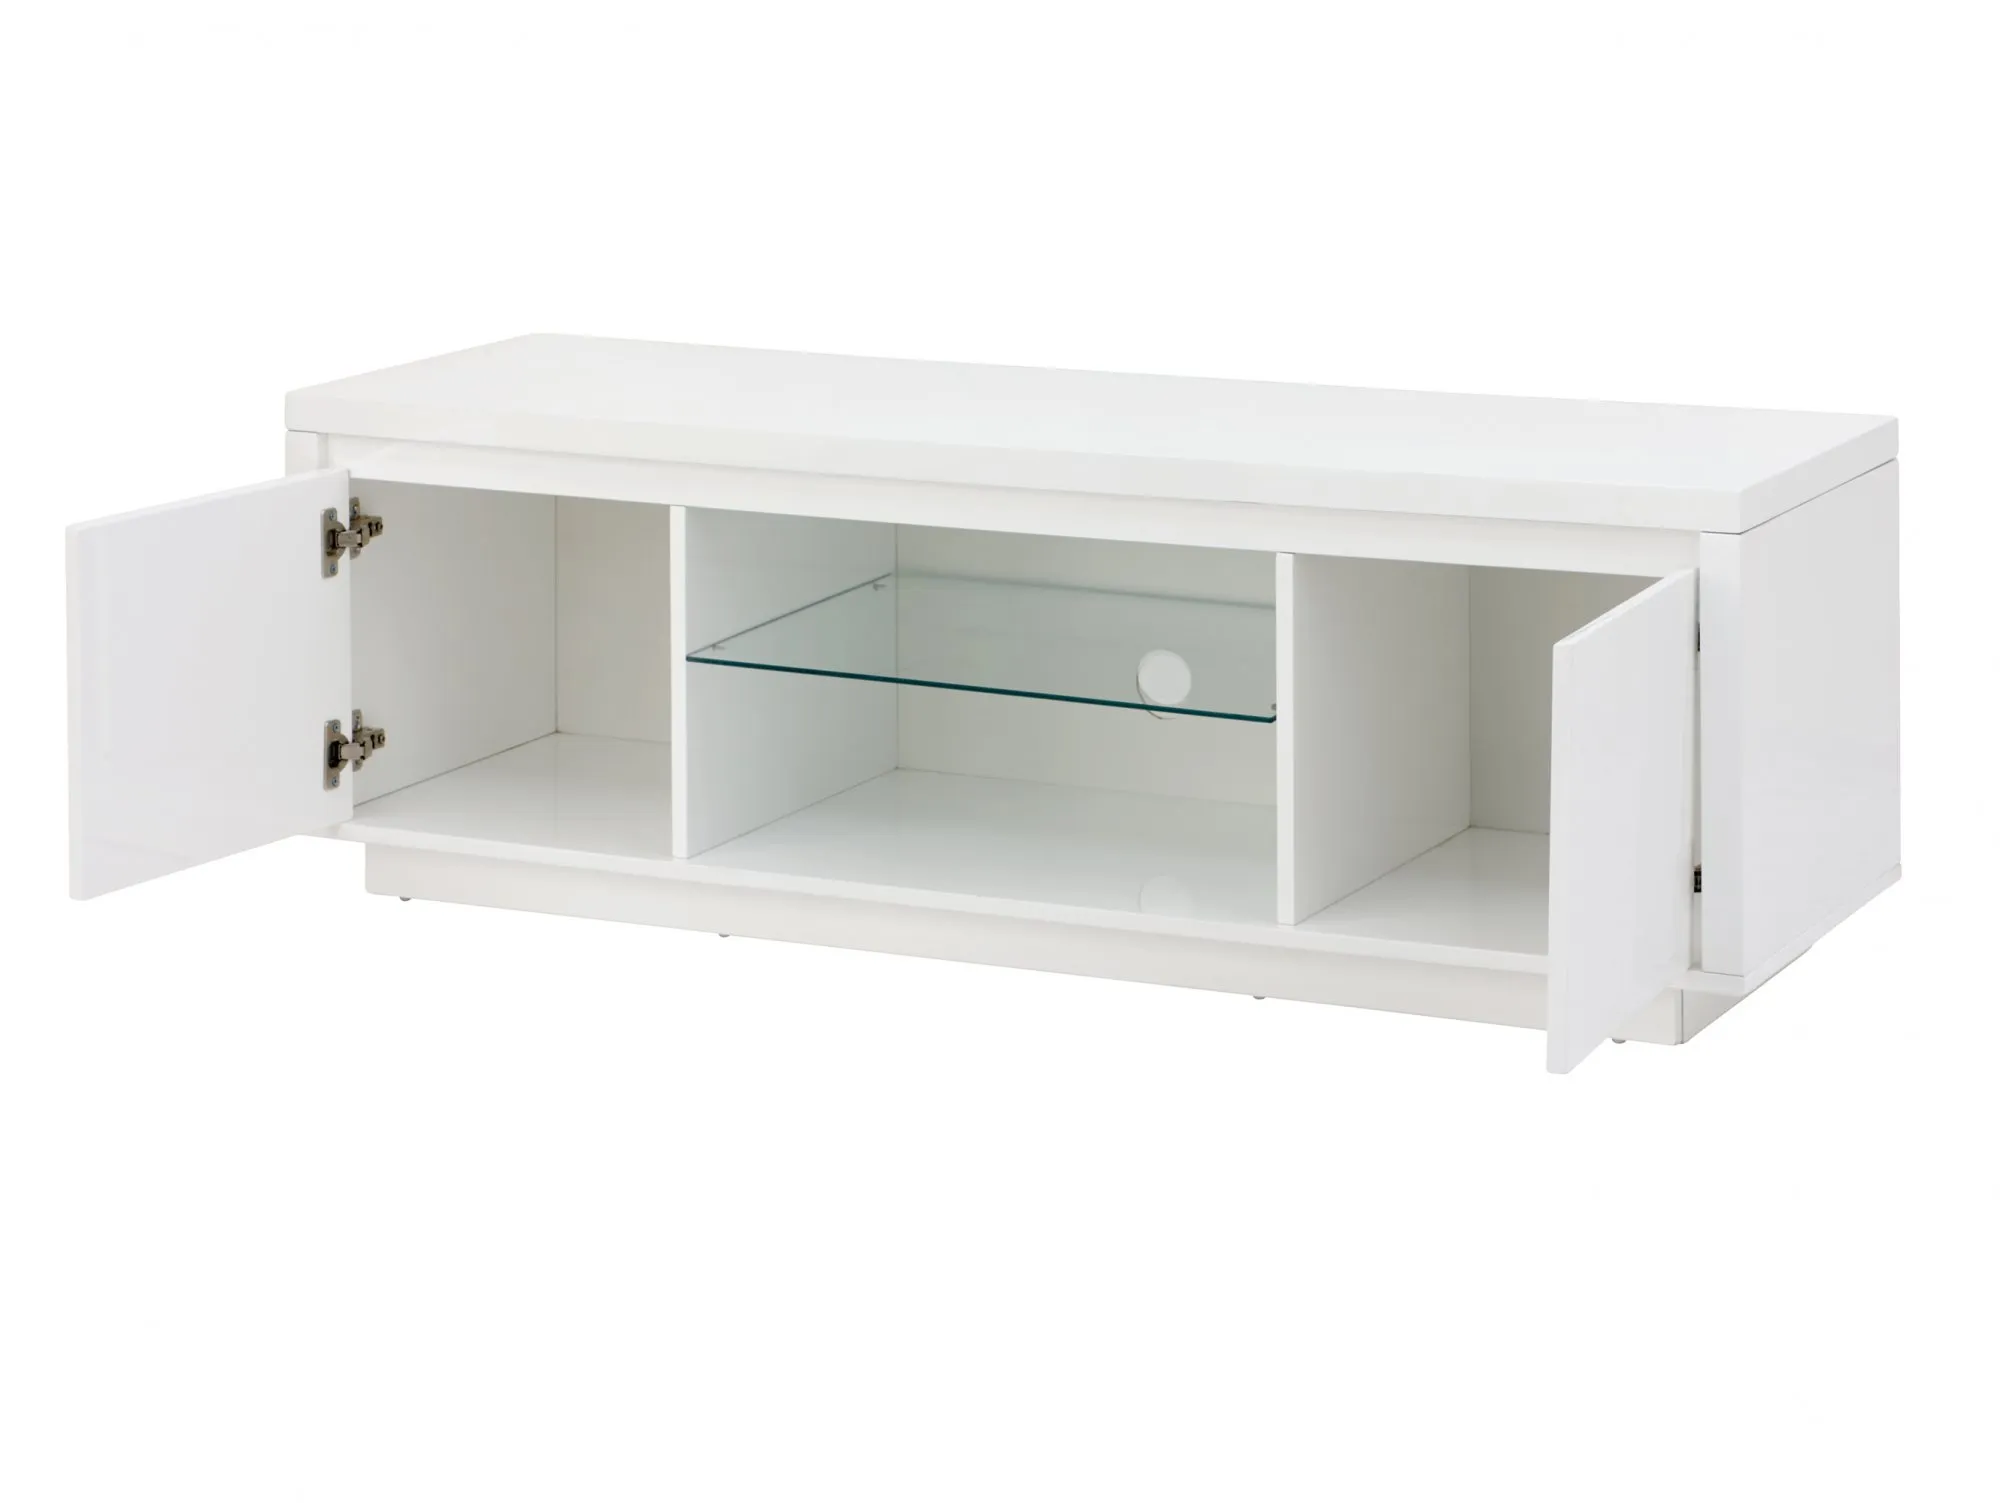 GFW GFW Polar White High Gloss 2 Door Large TV Cabinet with LED Lighting